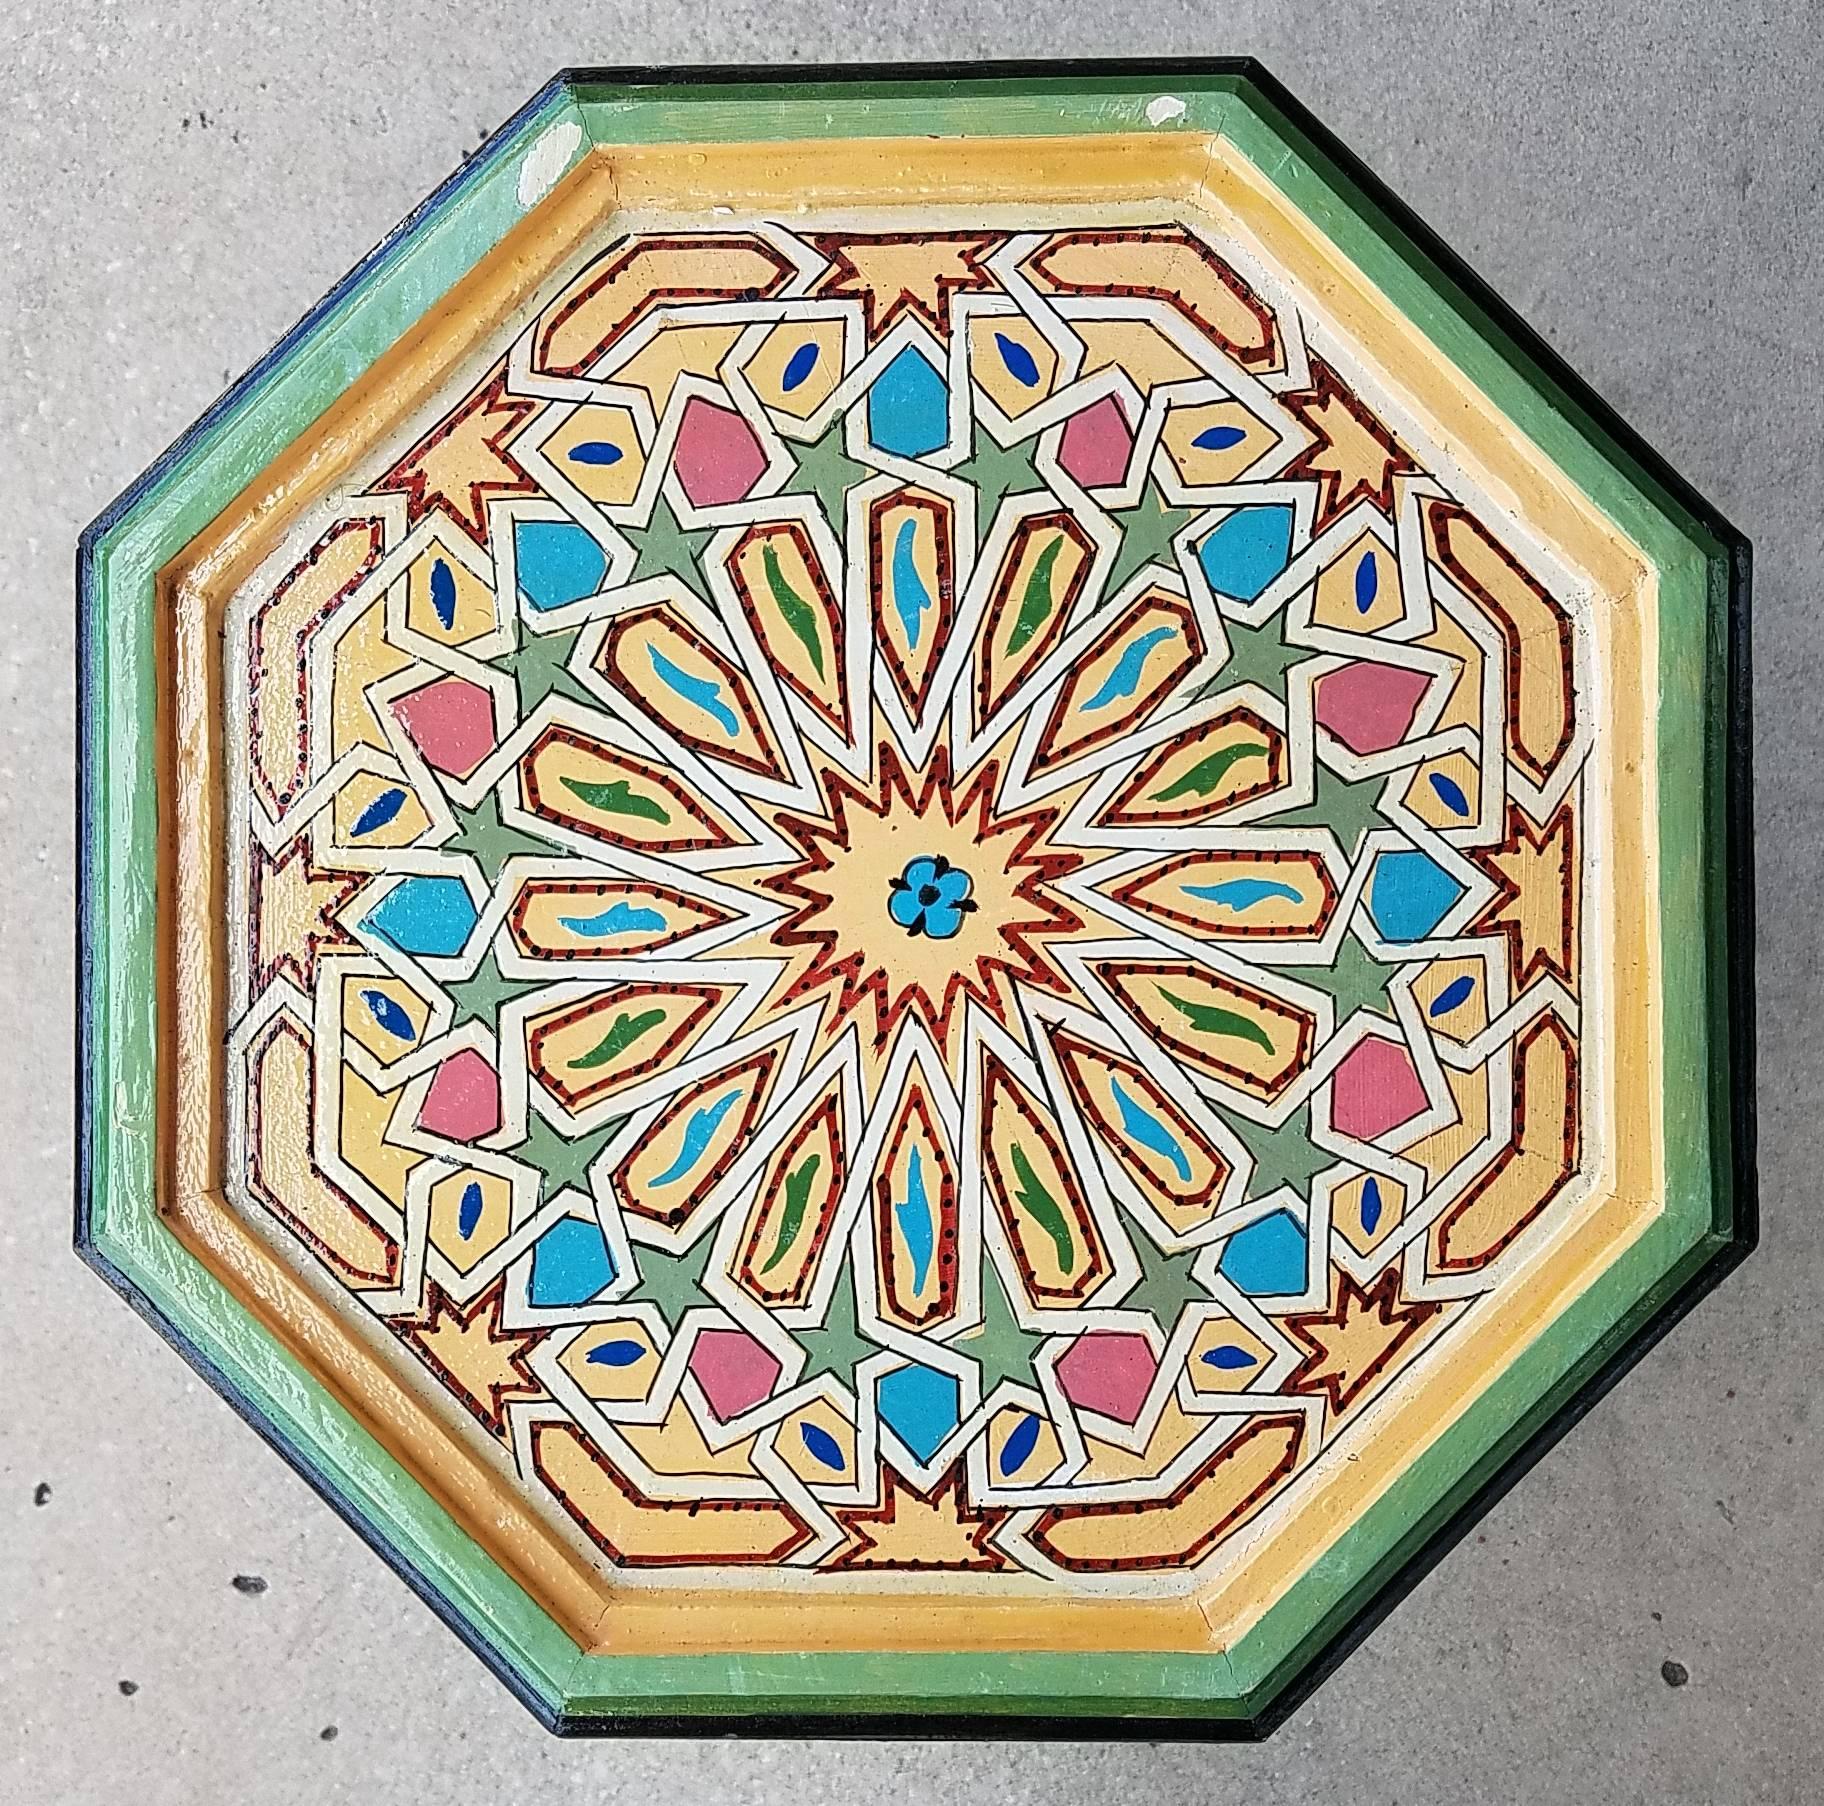 Rare find! 100% hand-painted Moroccan octagonal shape side table. Great handcraftsmanship throughout. Beautiful add-on to your decor. This table measures approximately 28? in height, 16? in diameter (14? at the base). Please contact us for more